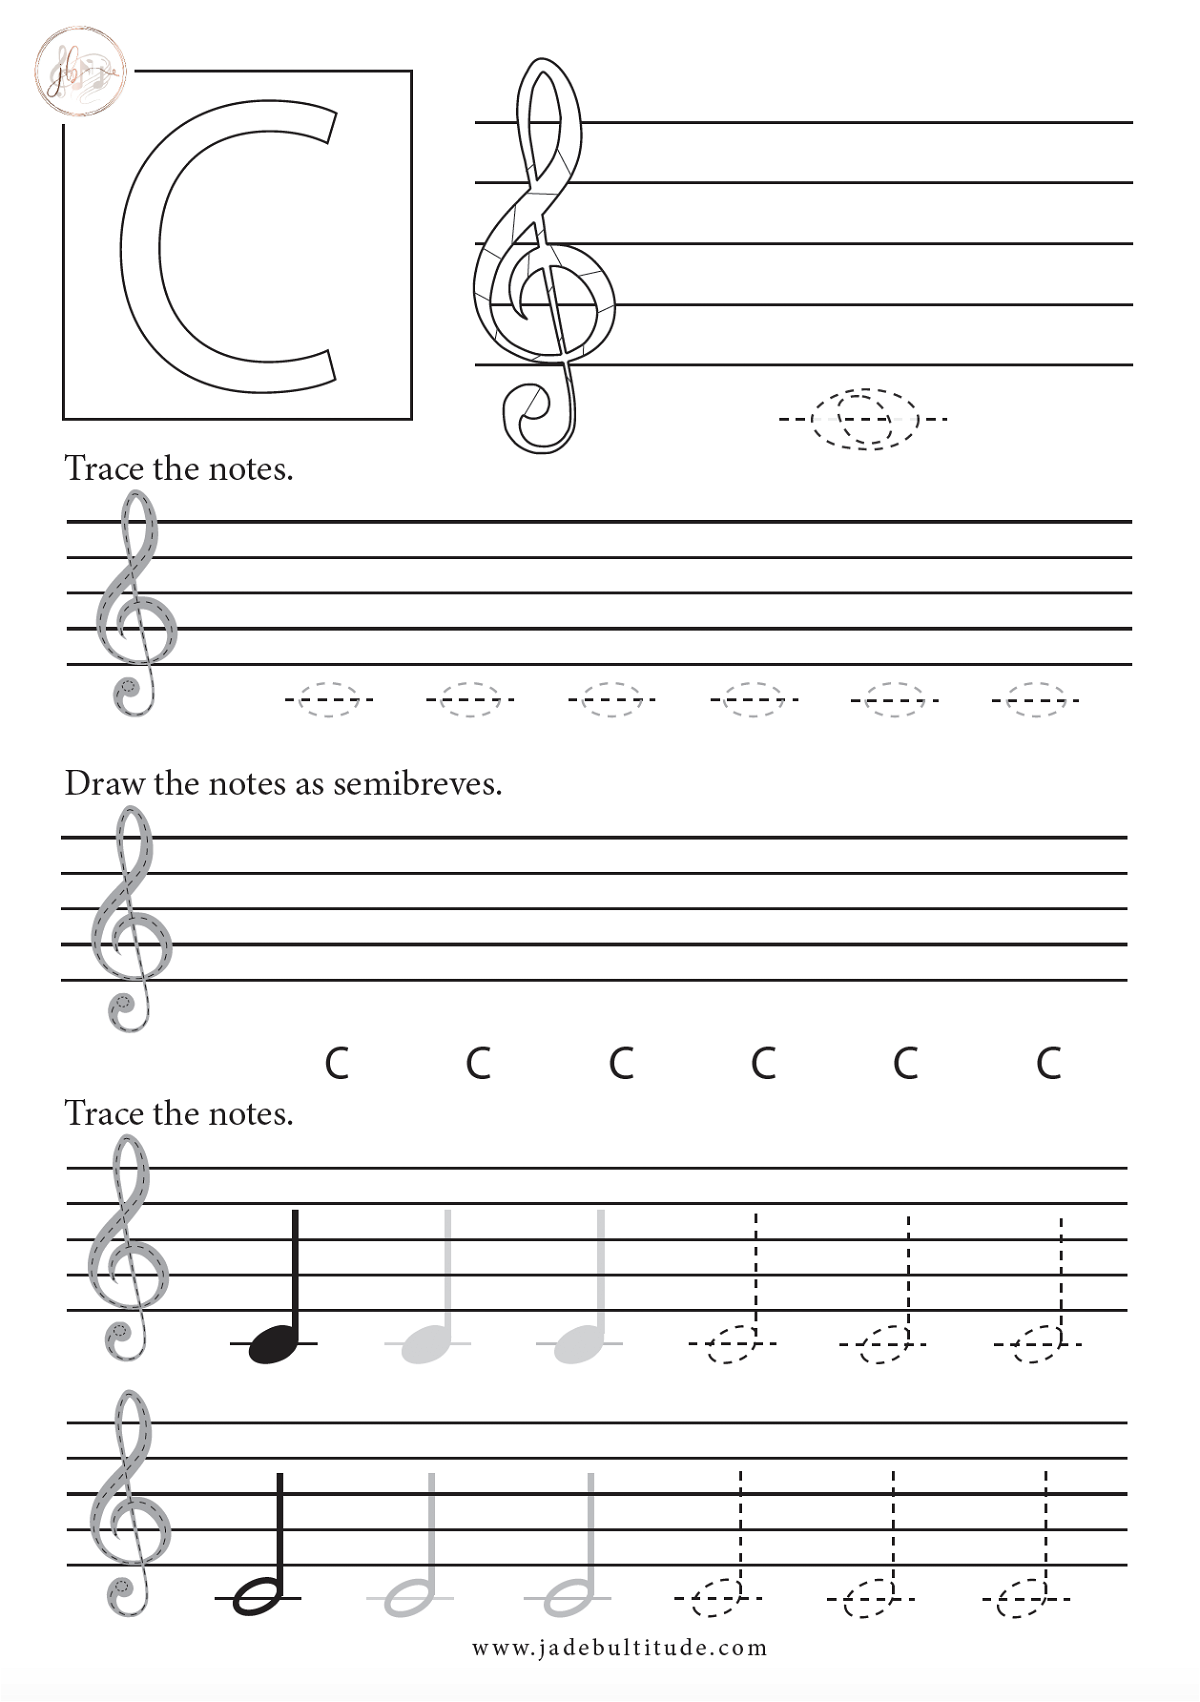 How To Draw Music Notes On A Staff